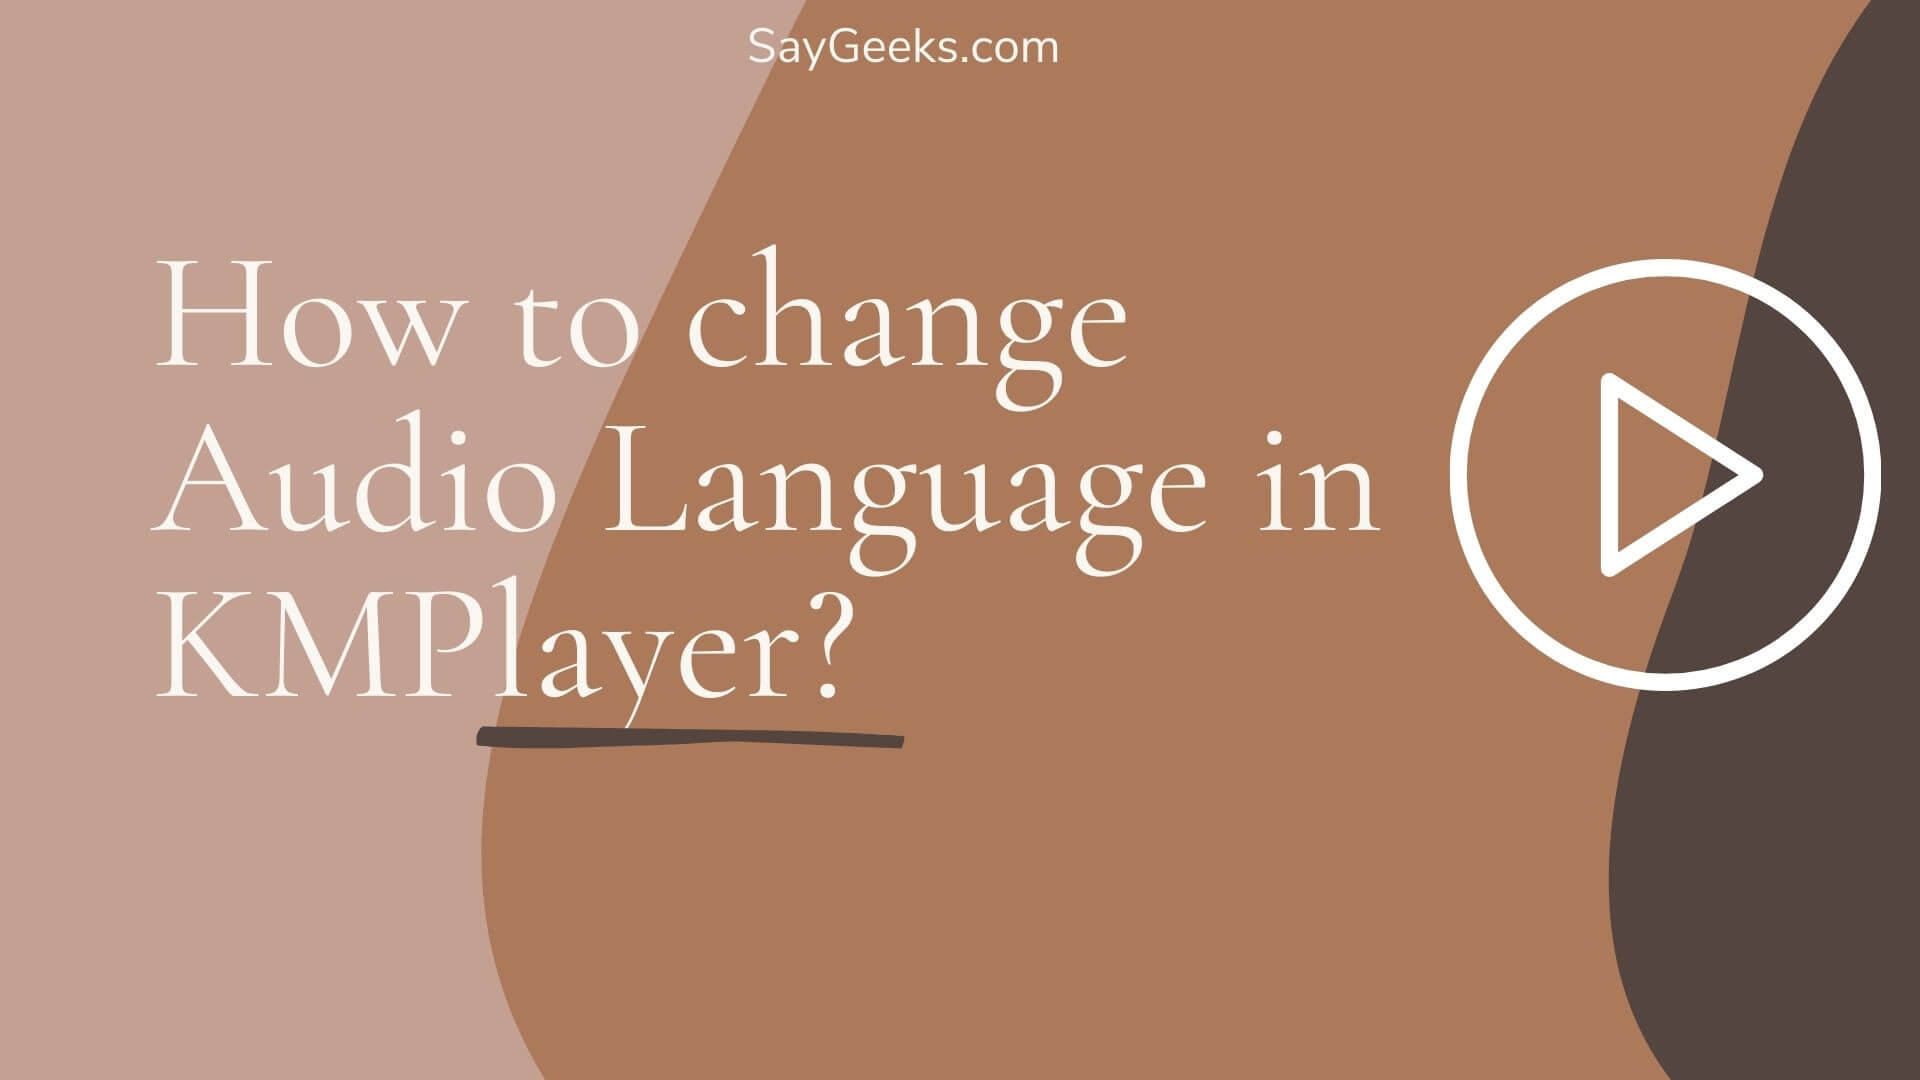 How to change Audio Language in KMPlayer? - Say Geeks